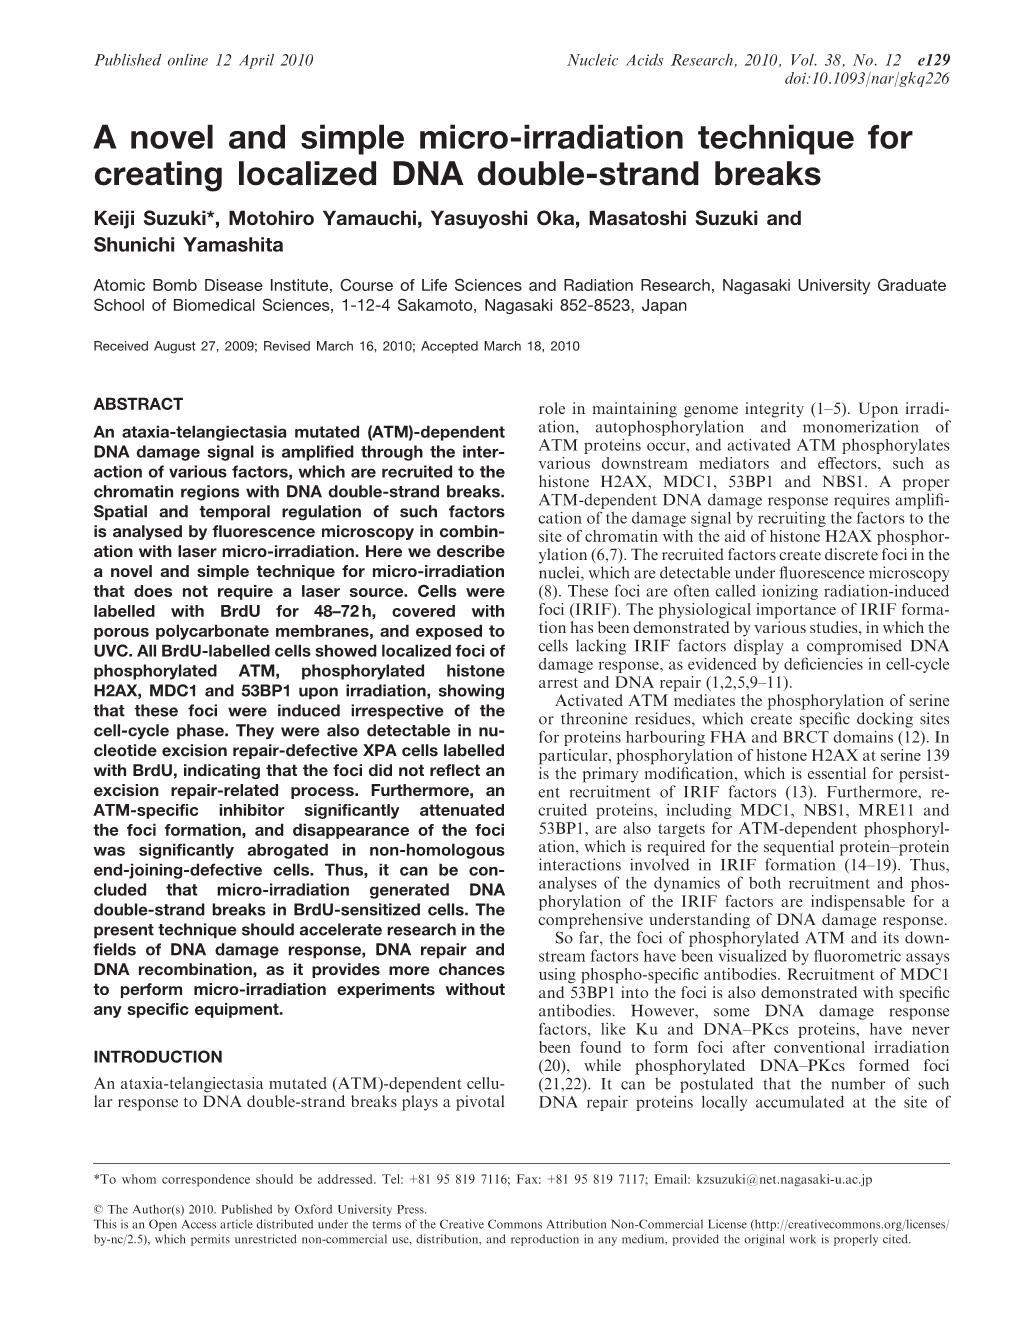 A Novel and Simple Micro-Irradiation Technique for Creating Localized DNA Double-Strand Breaks